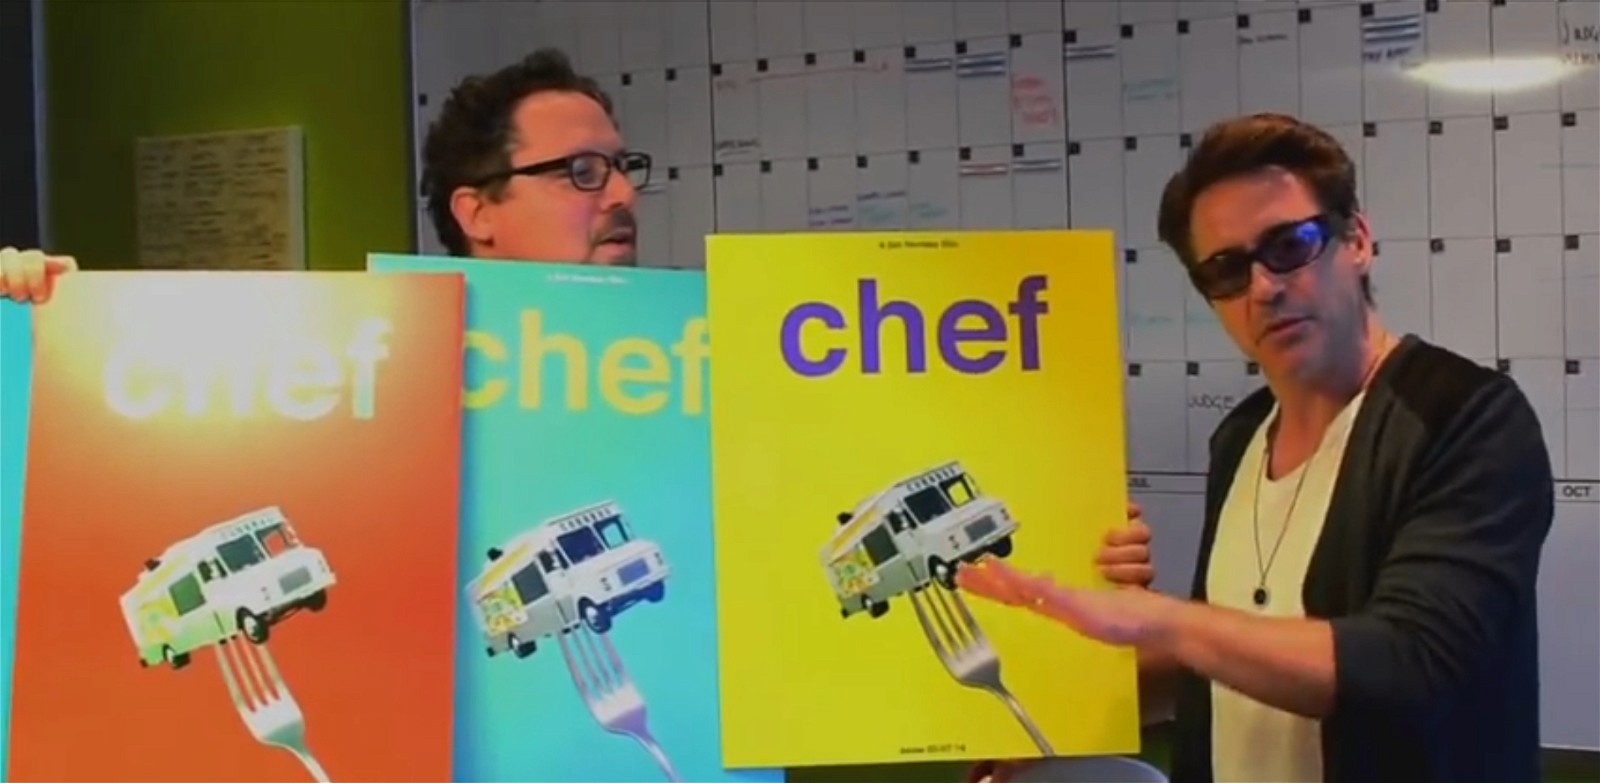 Posters designed by Robert Downey Jr. for Chef